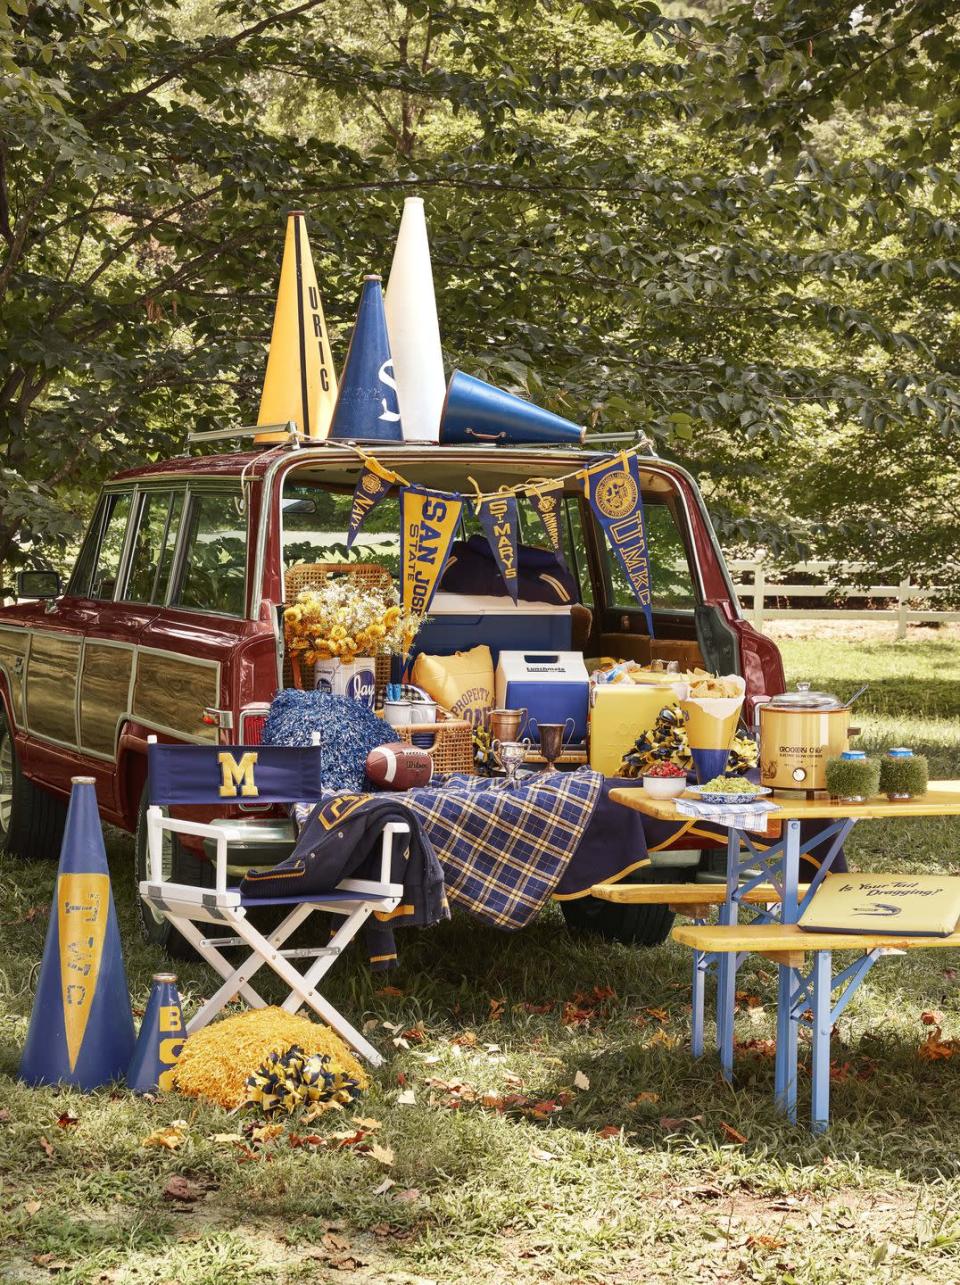 <p>Nothing says "party wagon" like this 1984 Grand Wagoneer decked out in fan flare. A portable beer garden table in team colors seats a crowd, while a canvas chair (featuring a DIY varsity letter monogram) provides a personalized perch. Pennants in a cohesive colorway add to the vintage varsity vibe, as do pom-poms, letterman’s jackets, and pillows made from old-school T-shirts.<br></p><p><a class="link rapid-noclick-resp" href="https://go.redirectingat.com?id=74968X1596630&url=https%3A%2F%2Fwww.etsy.com%2Fsearch%2Fvintage%3Fq%3Dmegaphones%26filter_distracting_content%3D1%26spell_correction_via_mmx%3D1%26vintage_rewrite%3Dvintage%2Bmegaphones%26original_query%3D2&sref=https%3A%2F%2Fwww.countryliving.com%2Fentertaining%2Fg3928%2Ffootball-decorations%2F" rel="nofollow noopener" target="_blank" data-ylk="slk:SHOP VINTAGE MEGAPHONES">SHOP VINTAGE MEGAPHONES</a></p>